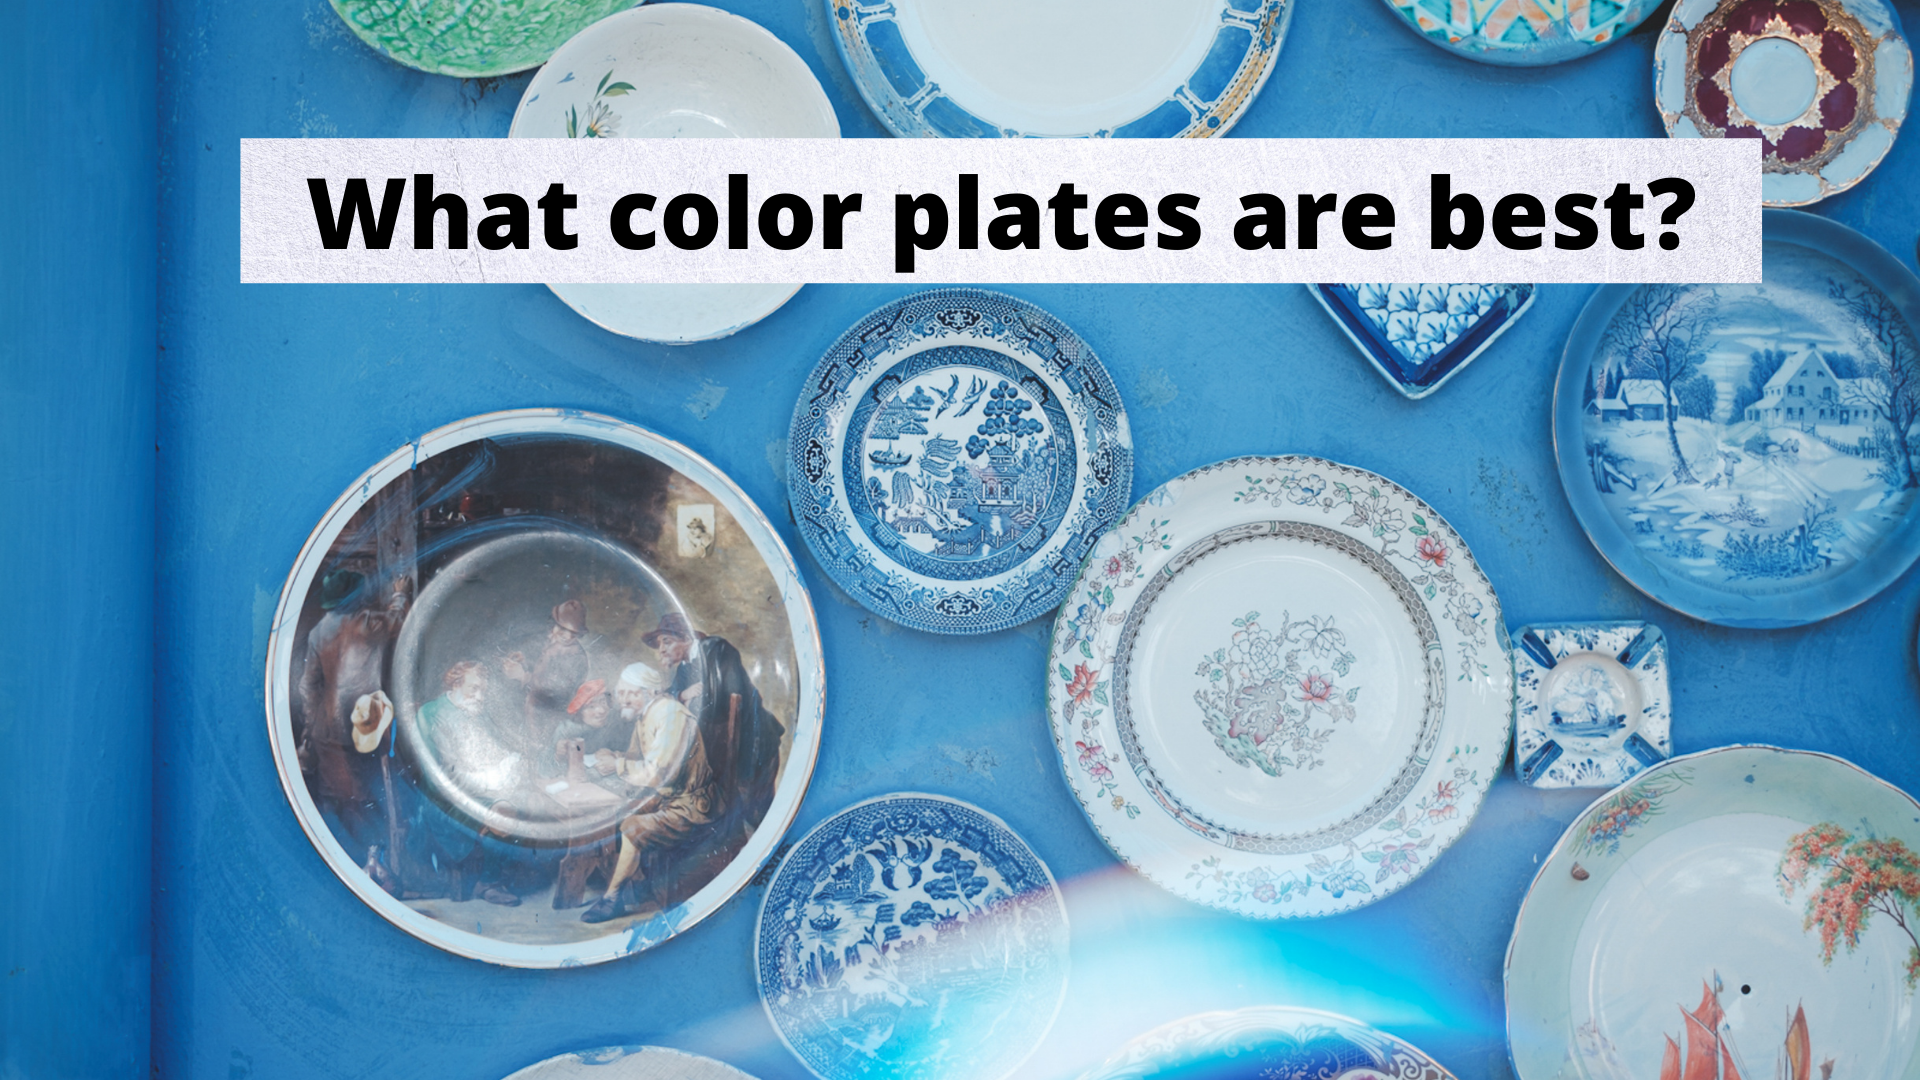 What color plates are best?